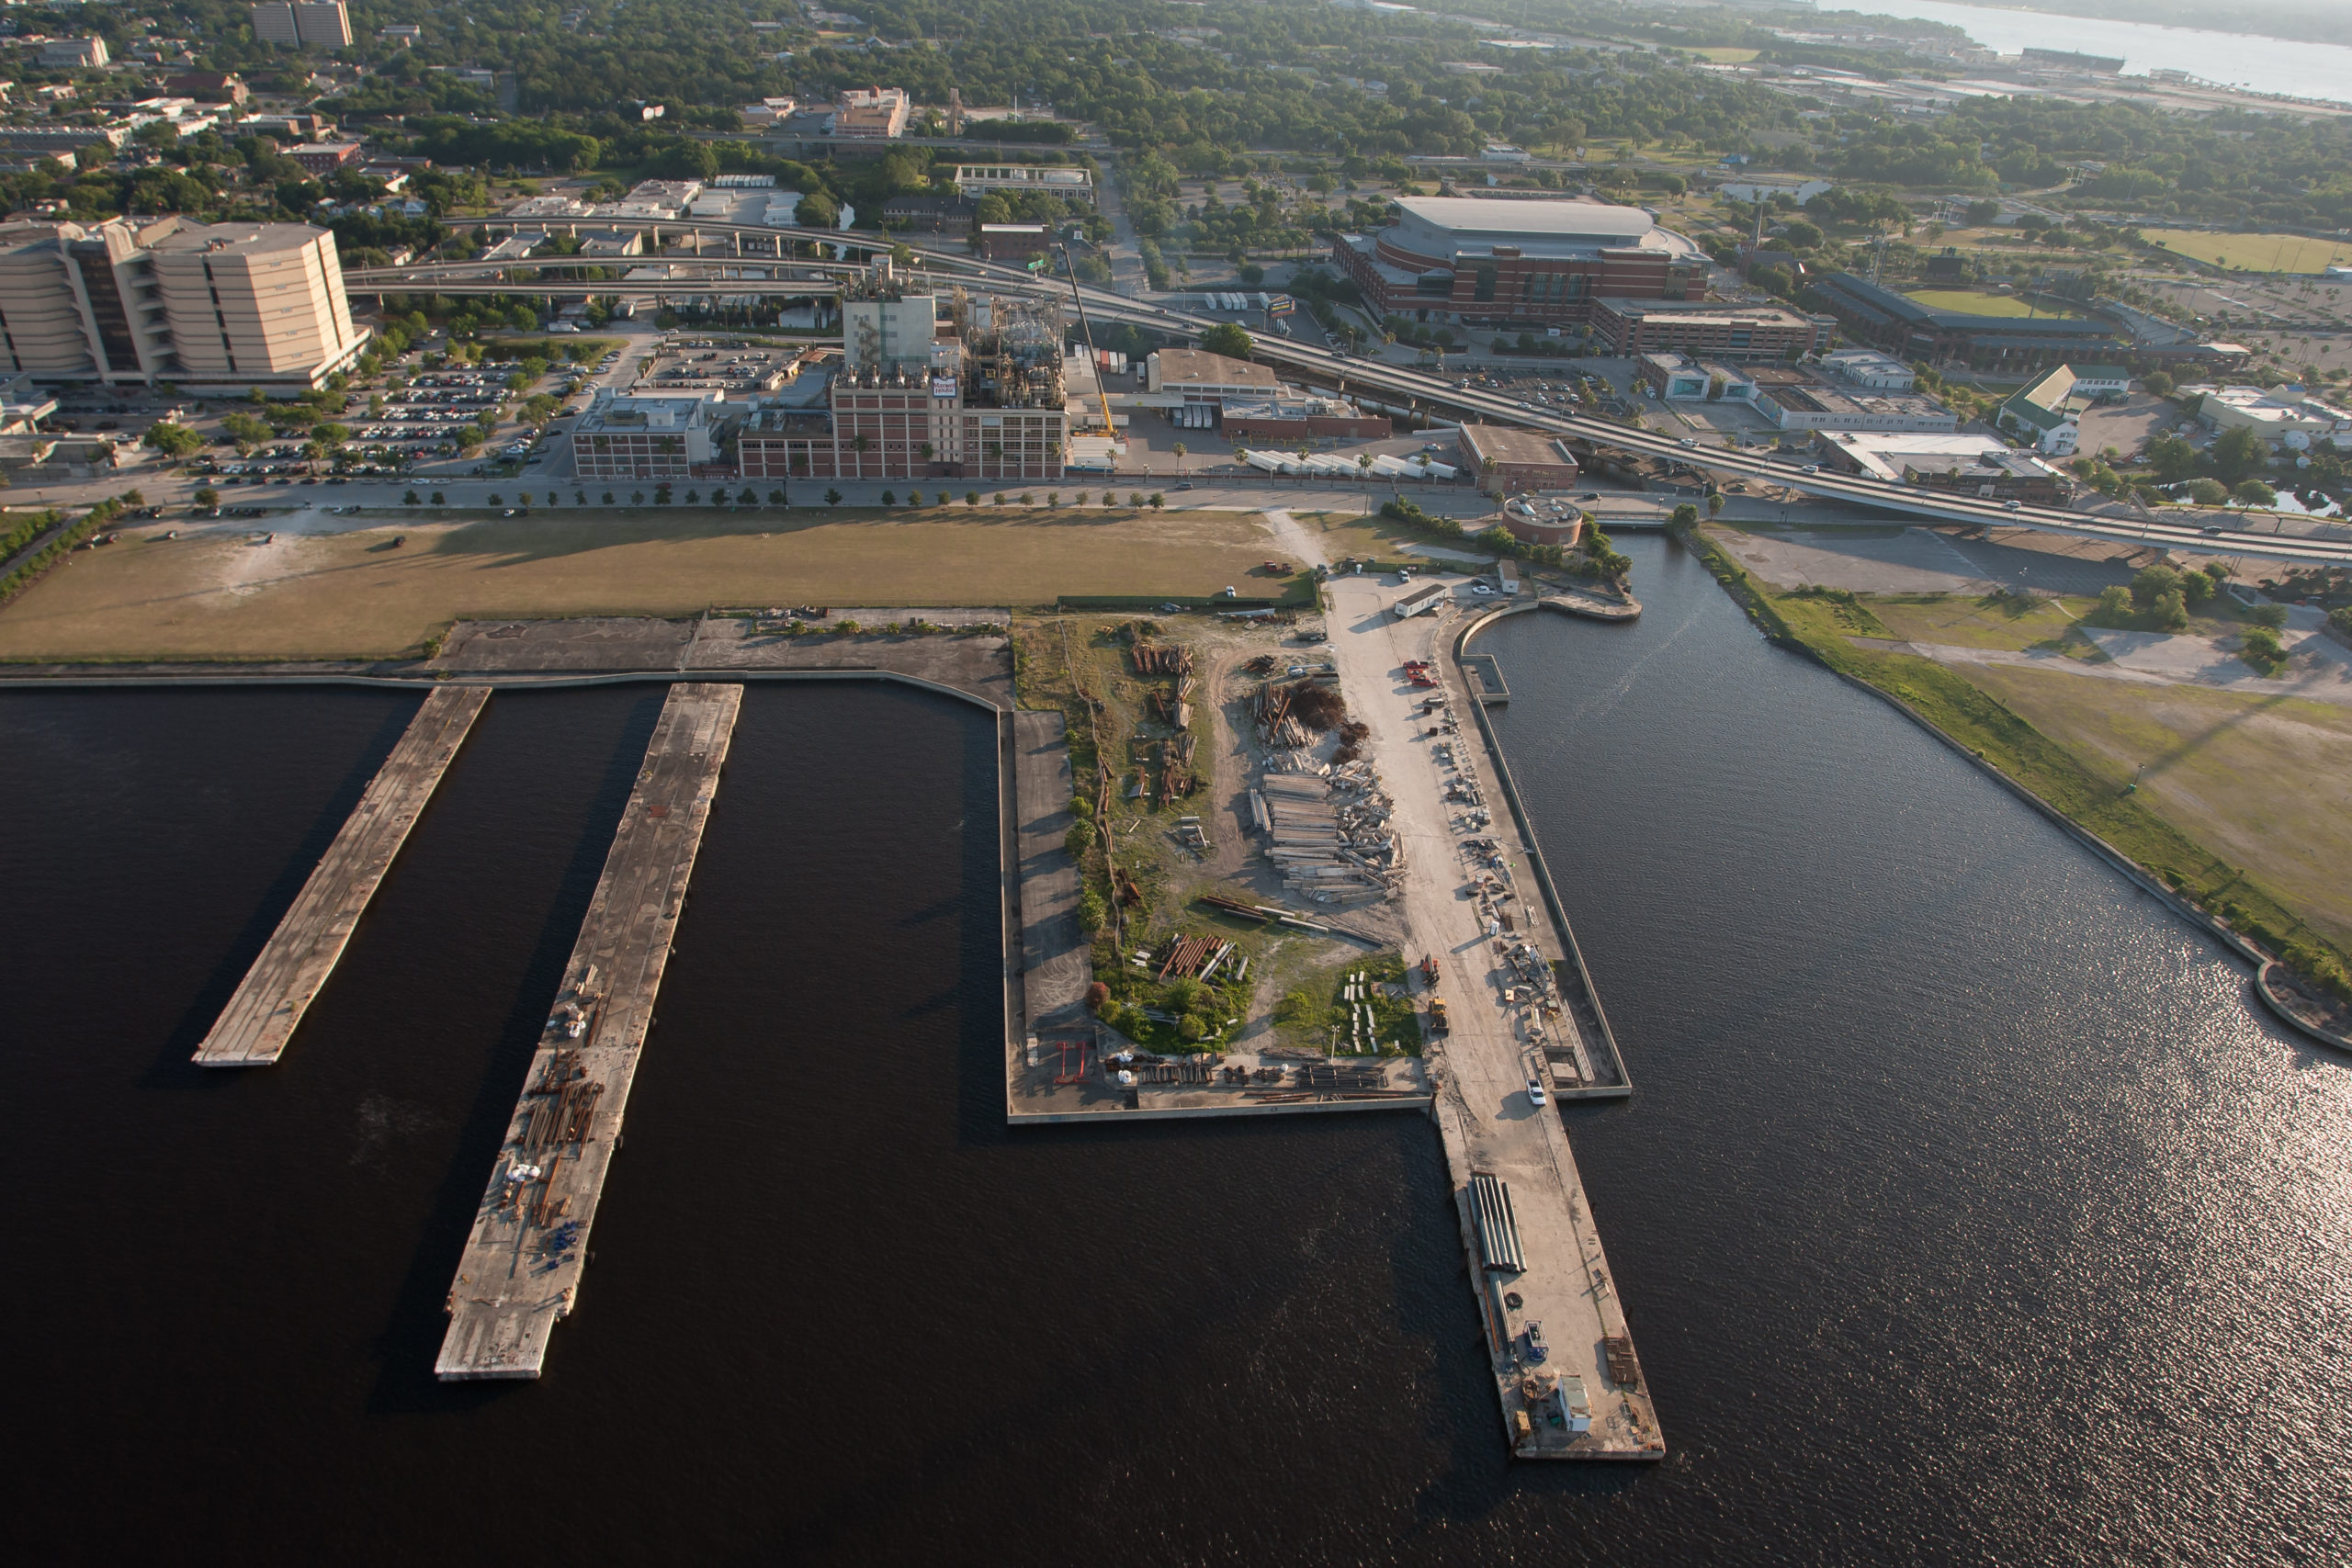 Aerial image of the location of the future Shipyards West Park